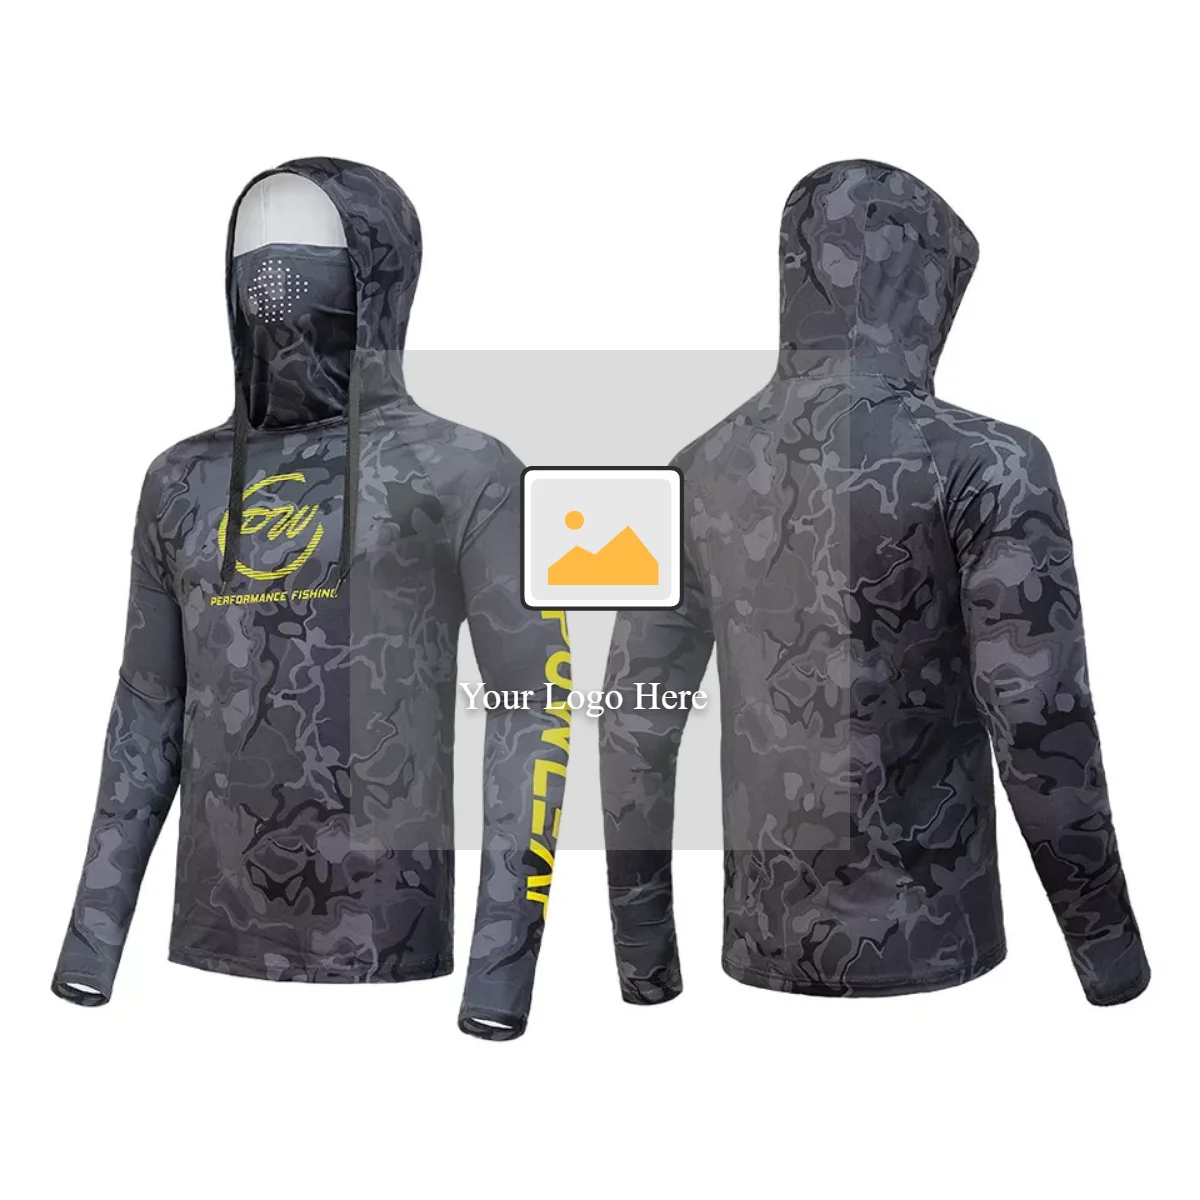 Performance Fishing Hoodie with Face Mask Hooded Sunblock Shirt Sun Shield Long Sleeve Shirt UPF50 Dry Fit Quick-Dry 